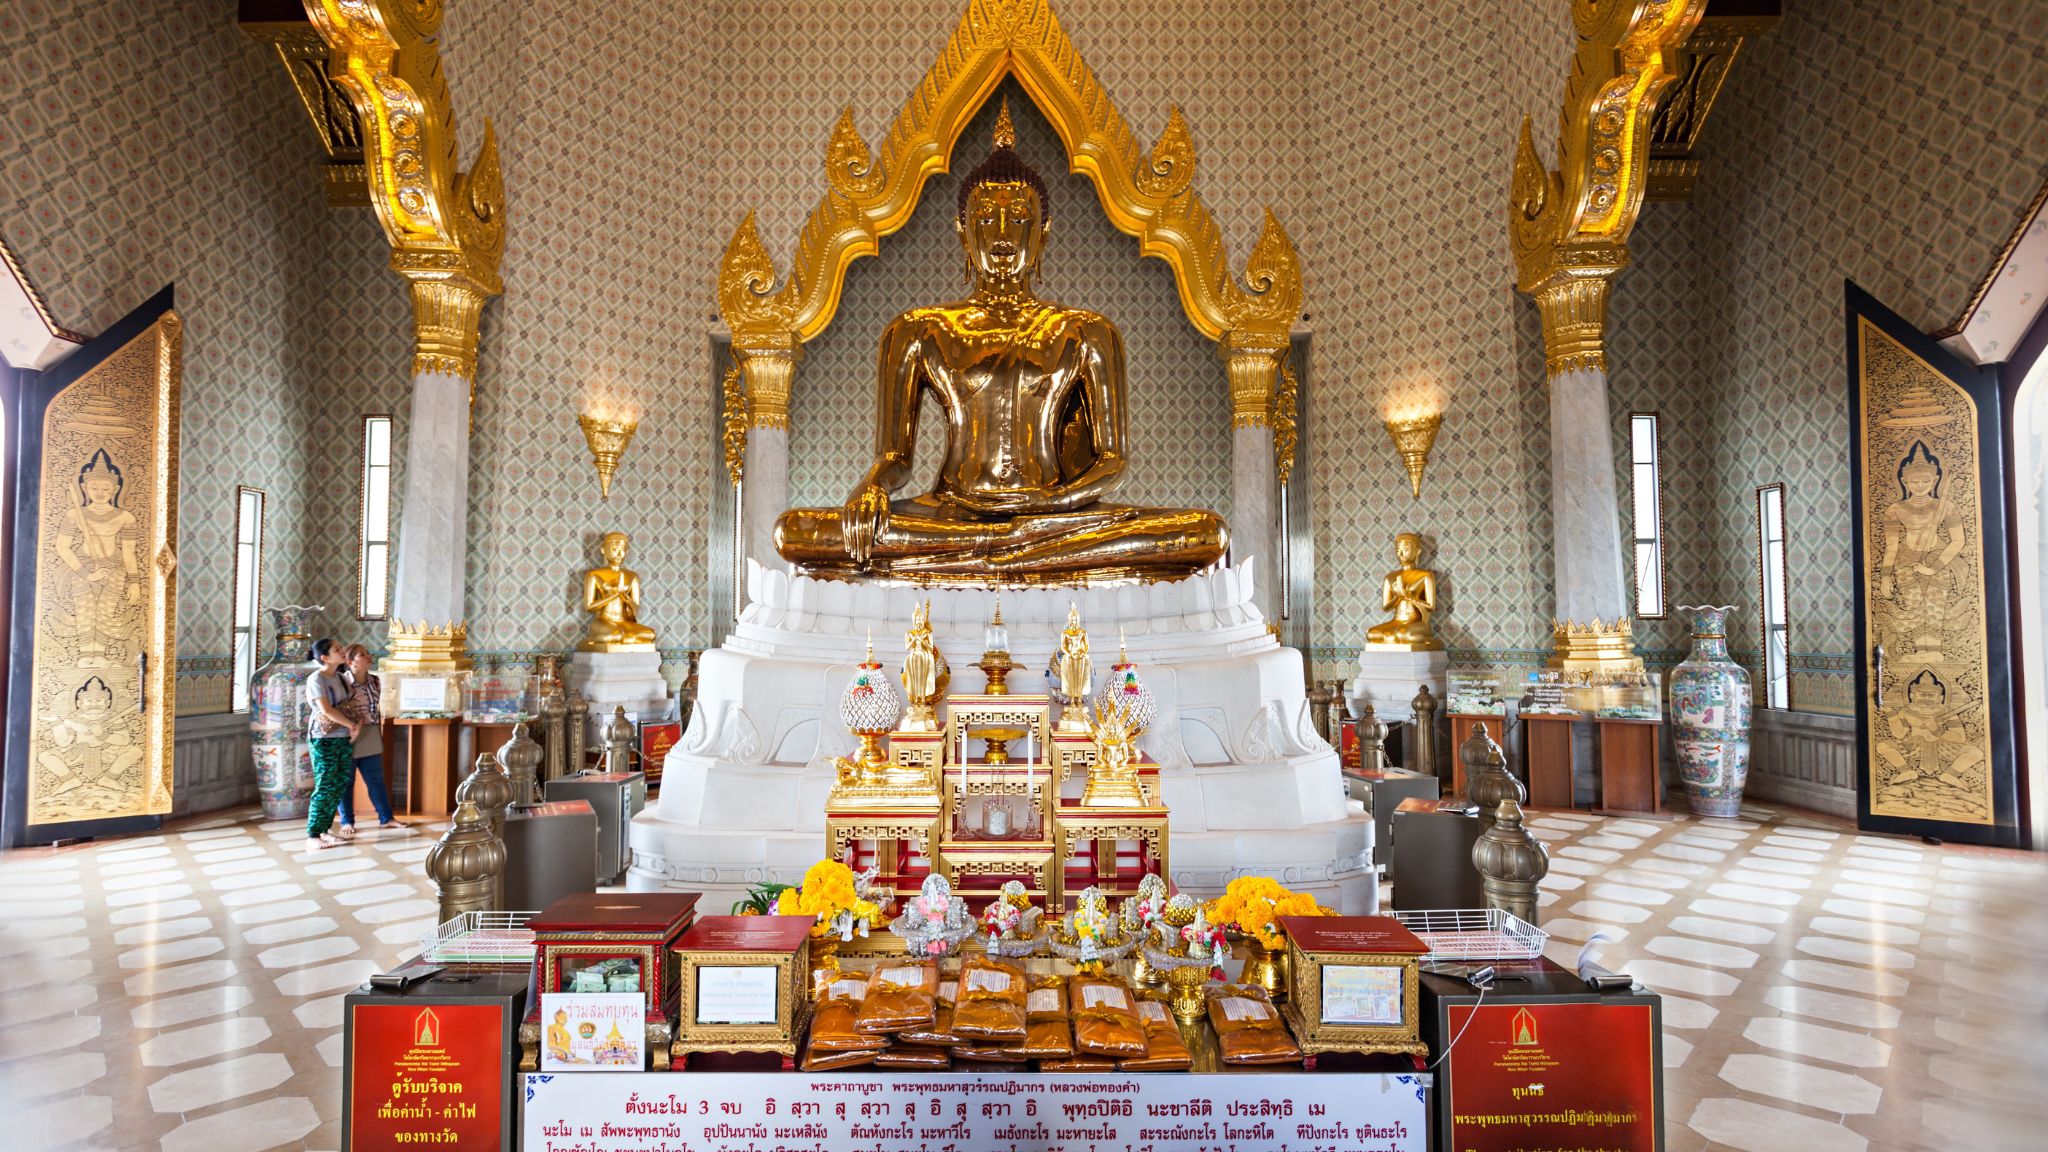 Day 2 Admire The Golden Buddha Statue Of Wat Traimit